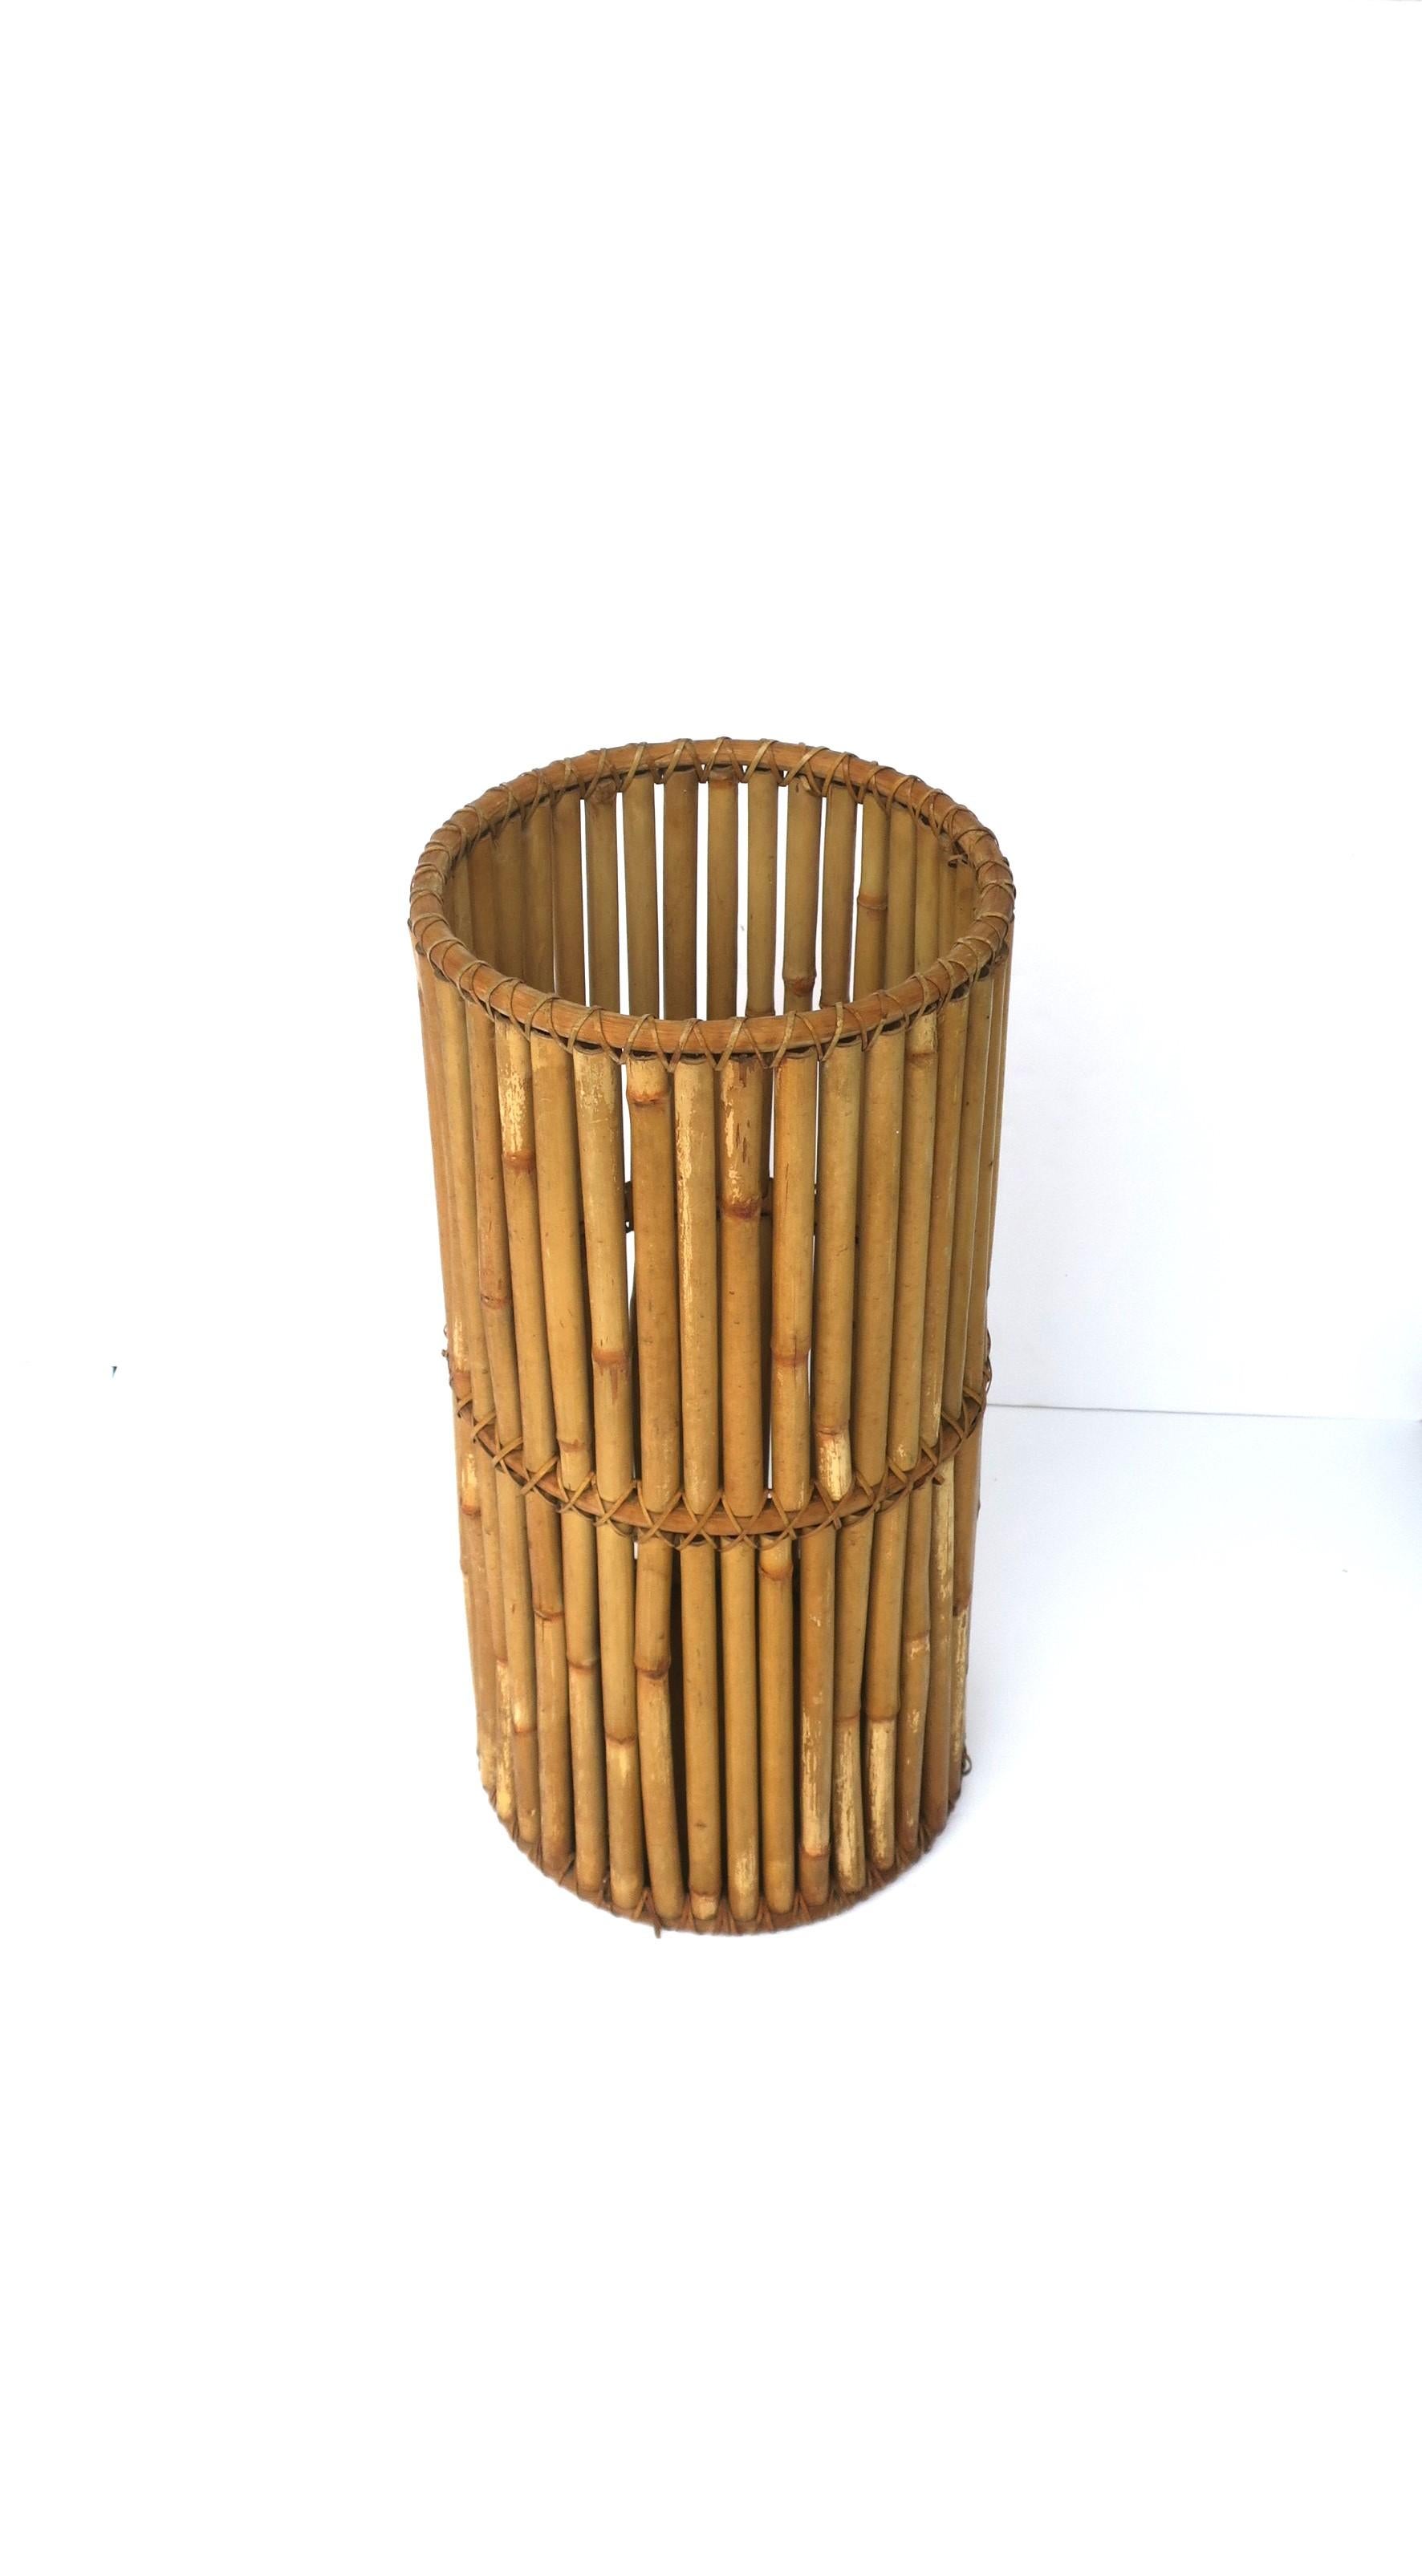 Wicker Bamboo Umbrella Holder Stand In Good Condition For Sale In New York, NY